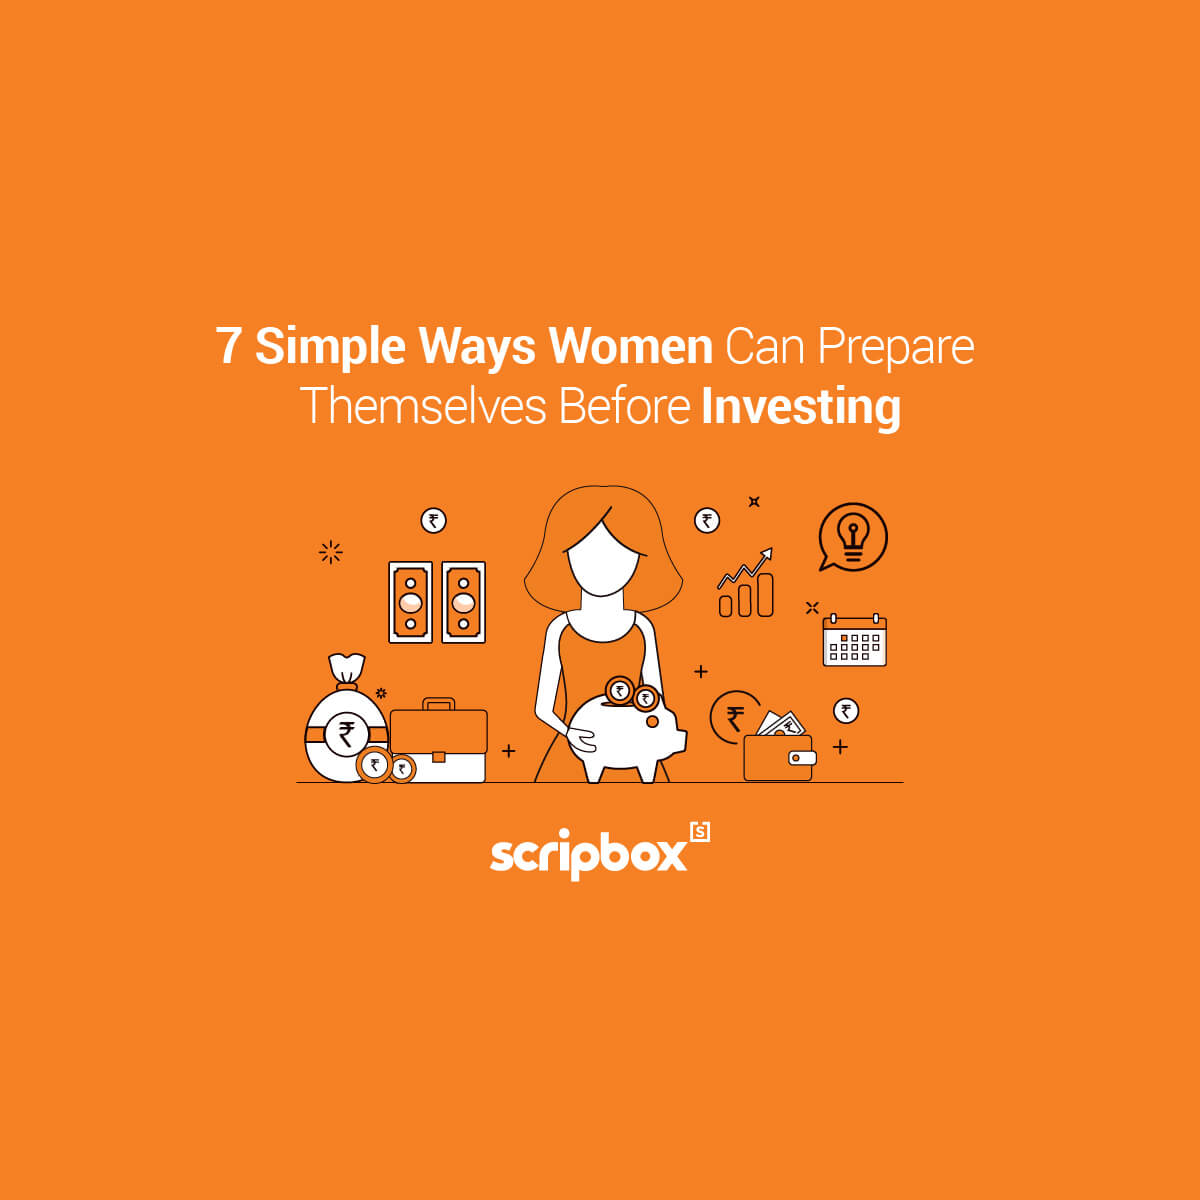 7-simple-ways-women-can-prepare-themselves-before-investing